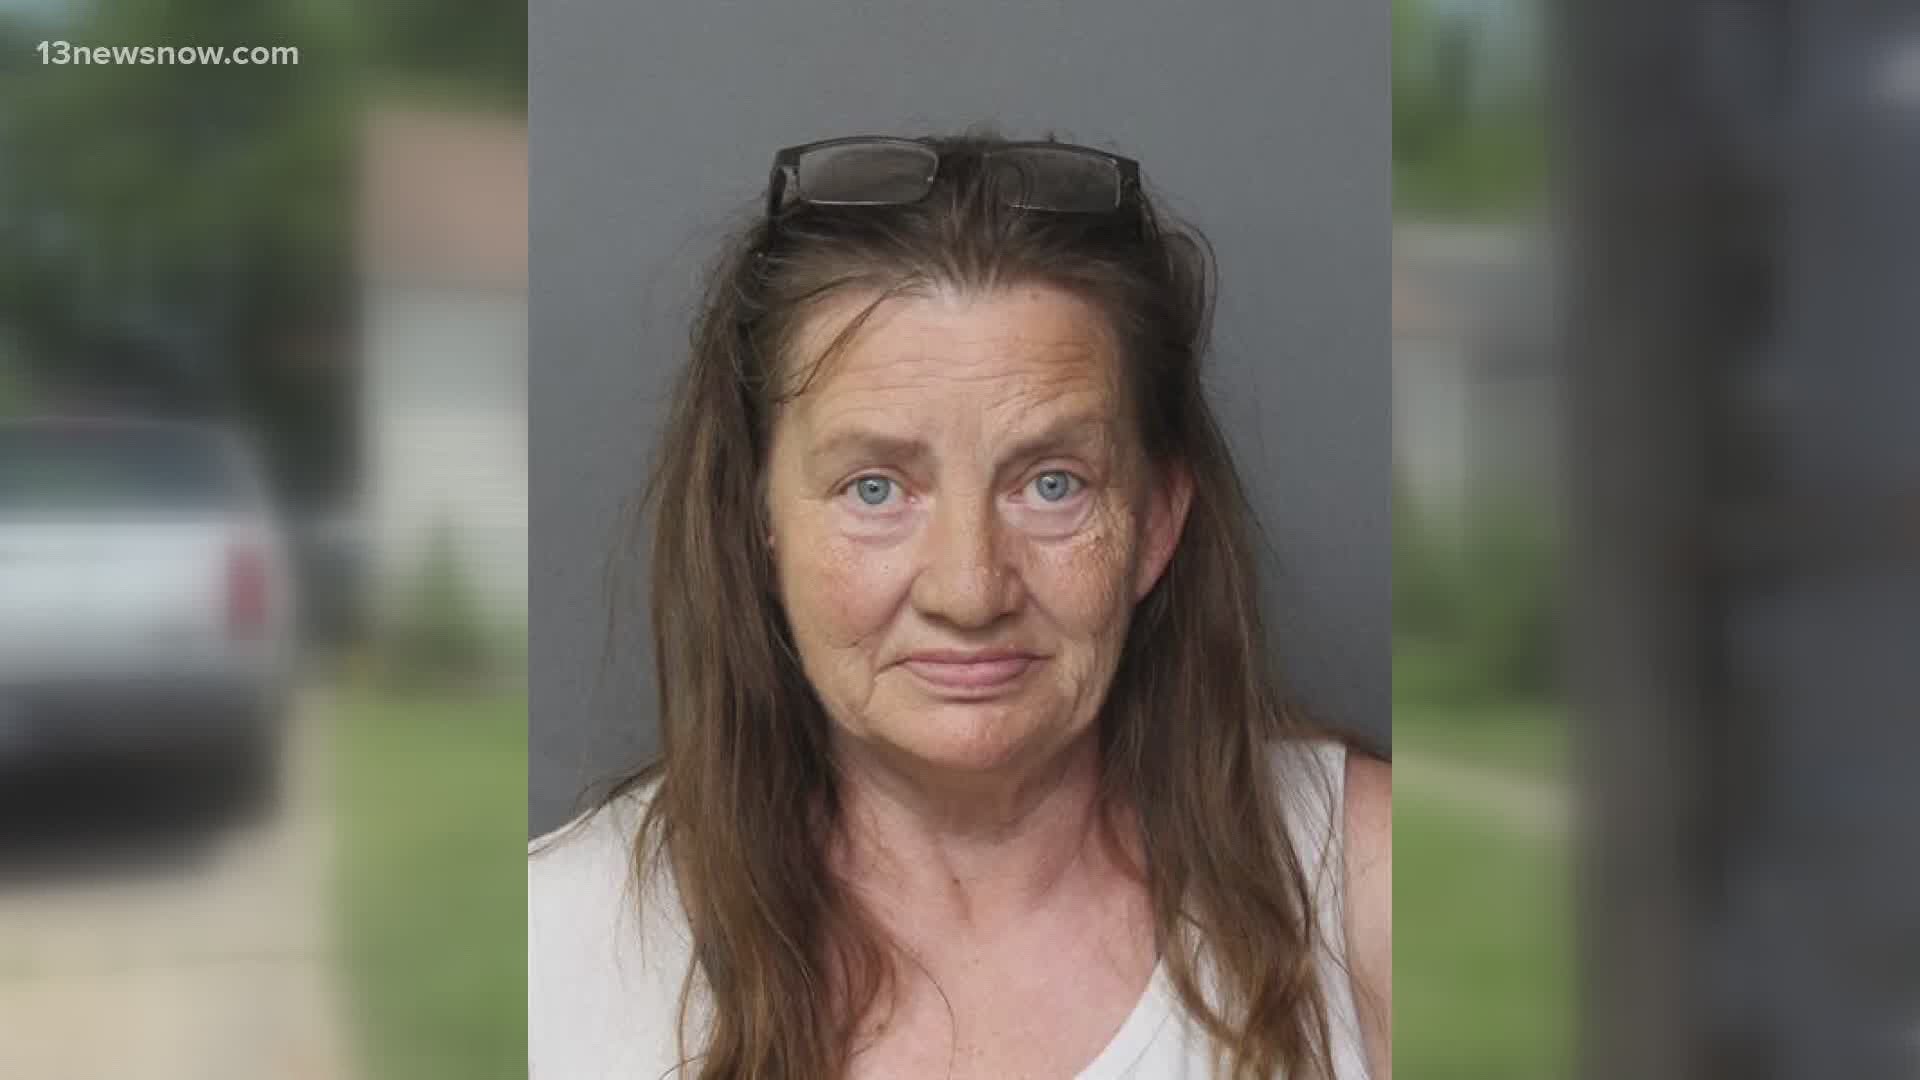 Georgia Arenz was arrested along with her husband Philip in May of 2018, following an investigation into the care of their adult son, who has cerebral palsy.